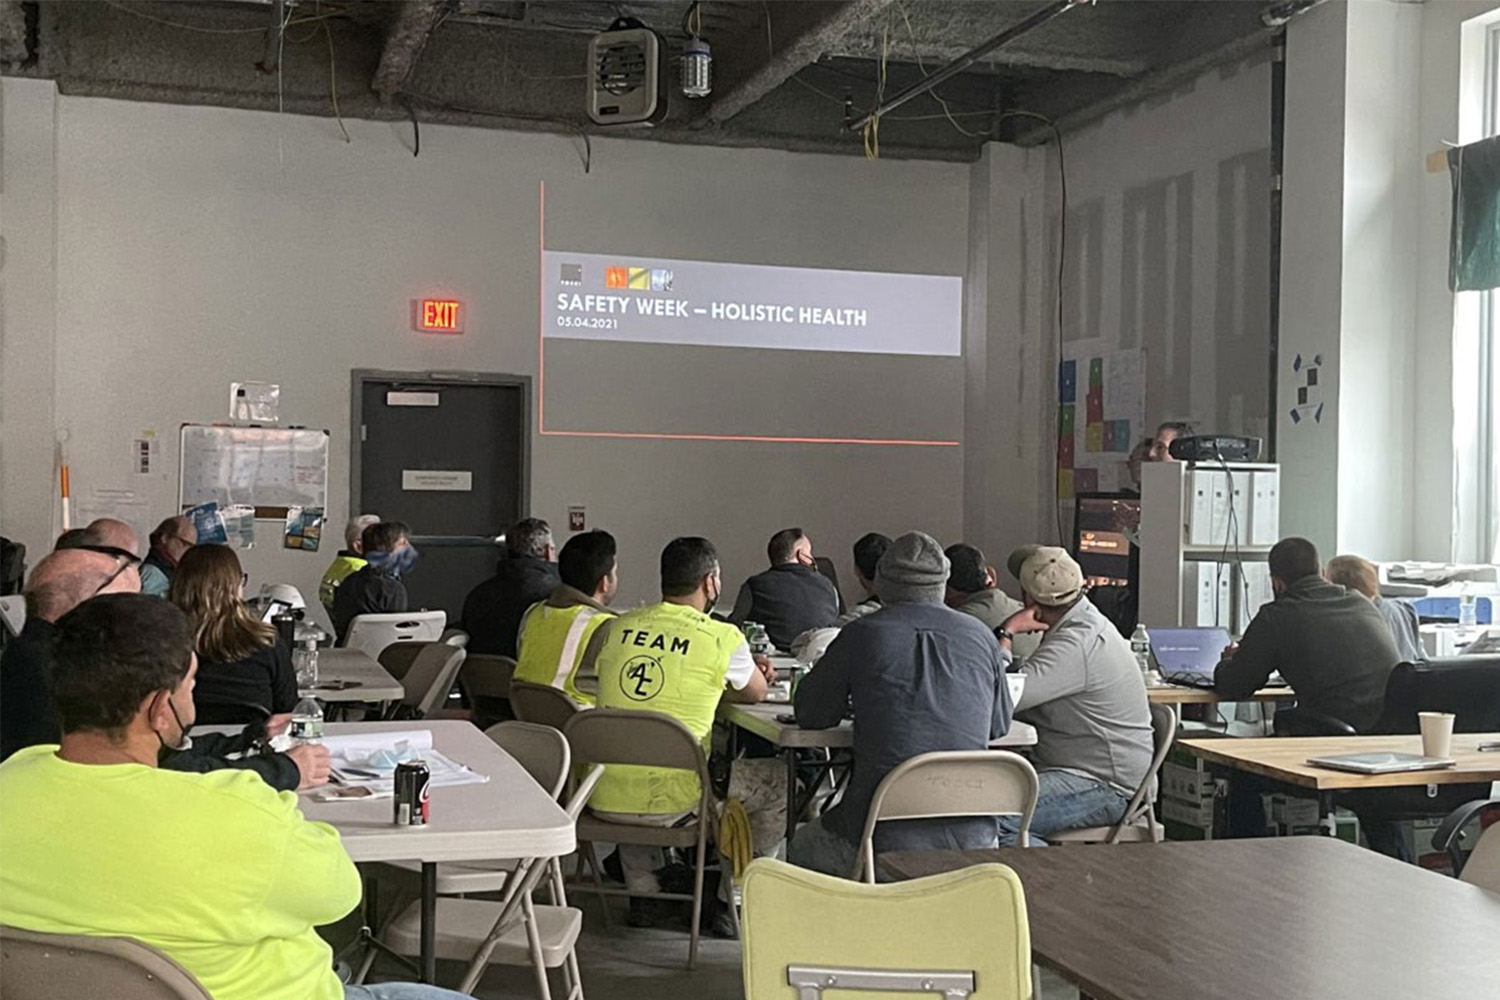 Bill Welch and Jim Boucher present on holistic health during National Safety Week to the project team and group of subcontractors on the Kendall East construction site in Cambridge